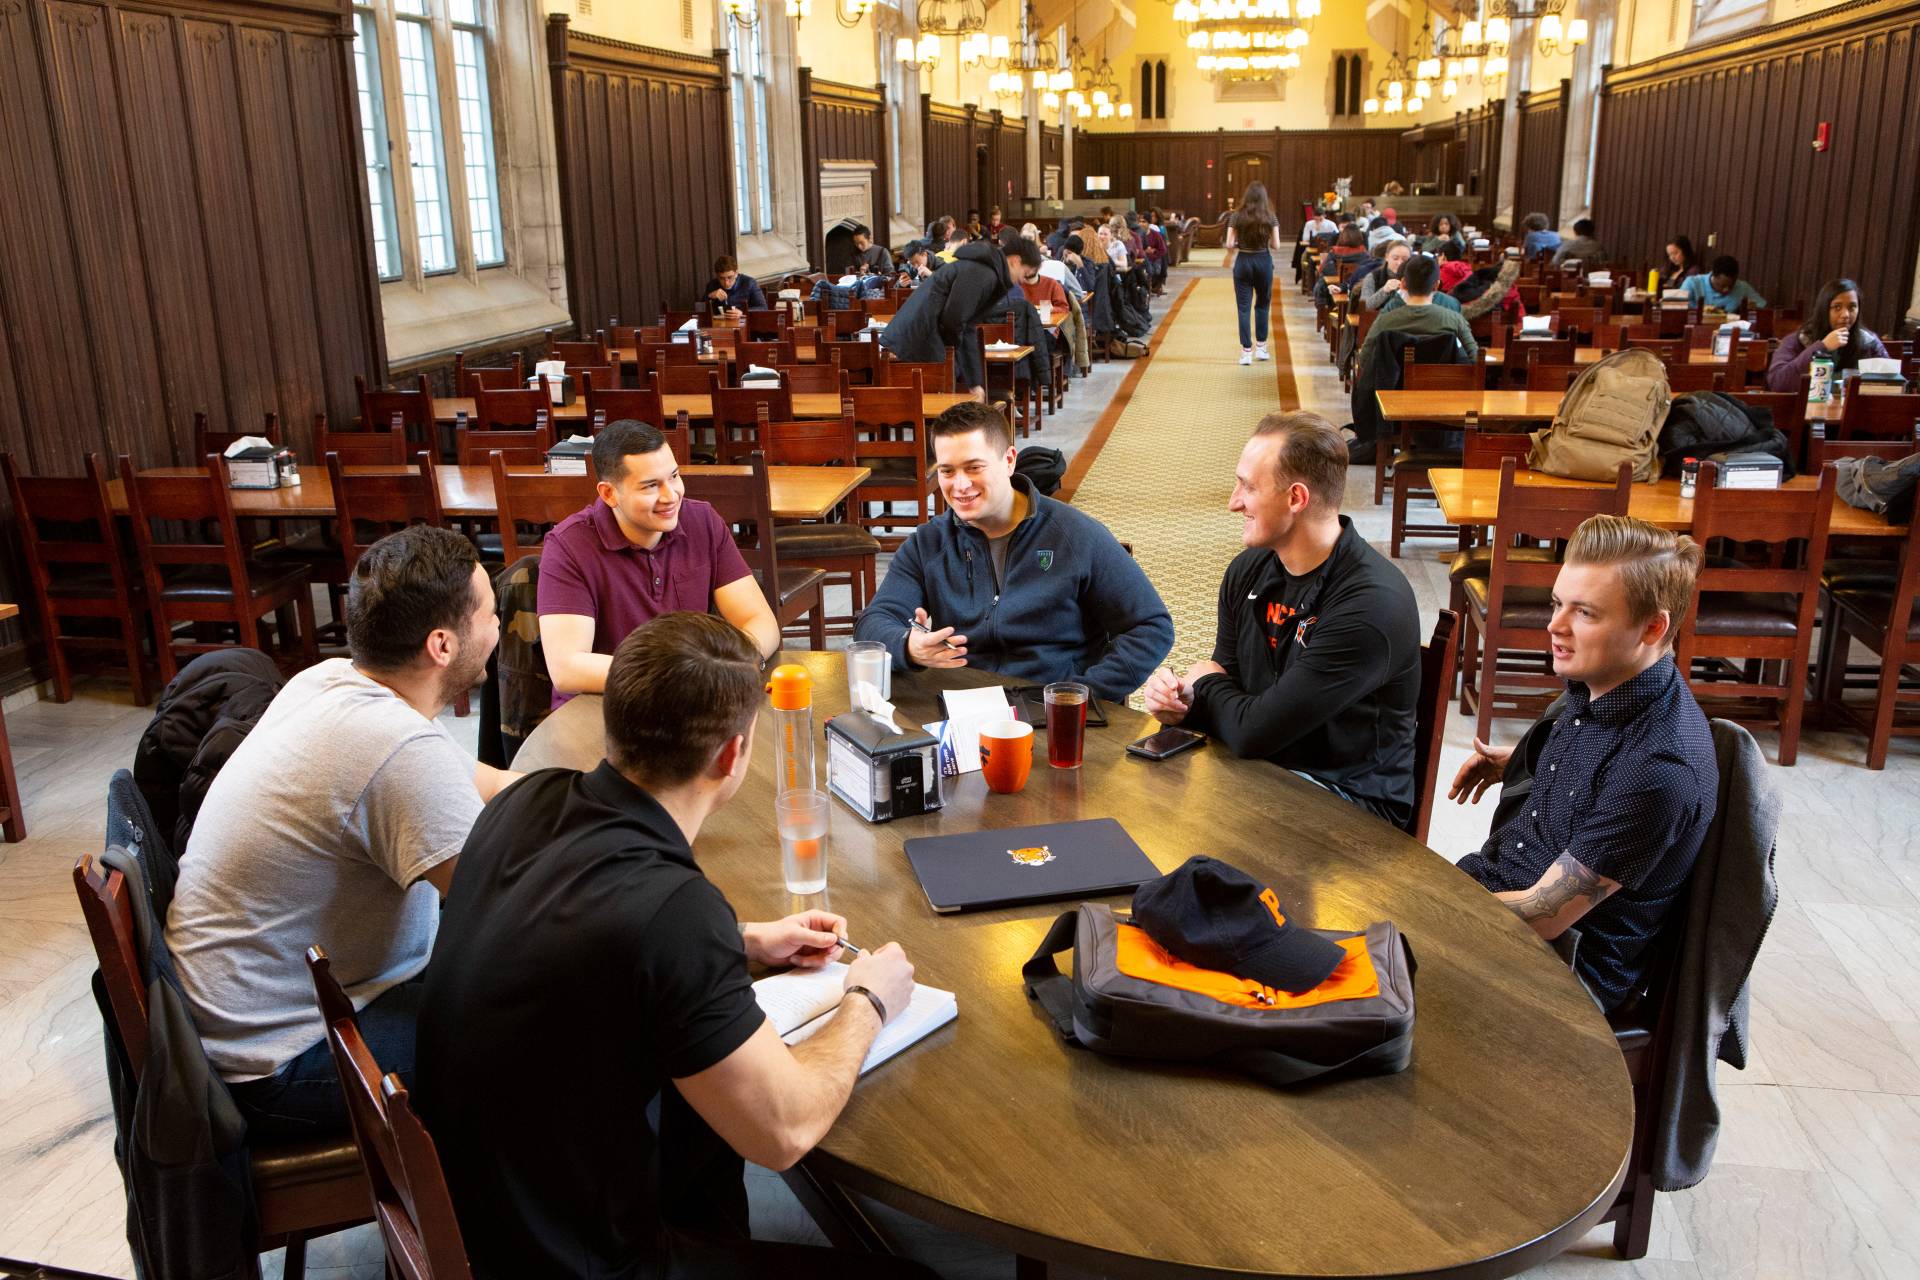 Students sitting around a table in a dining hall